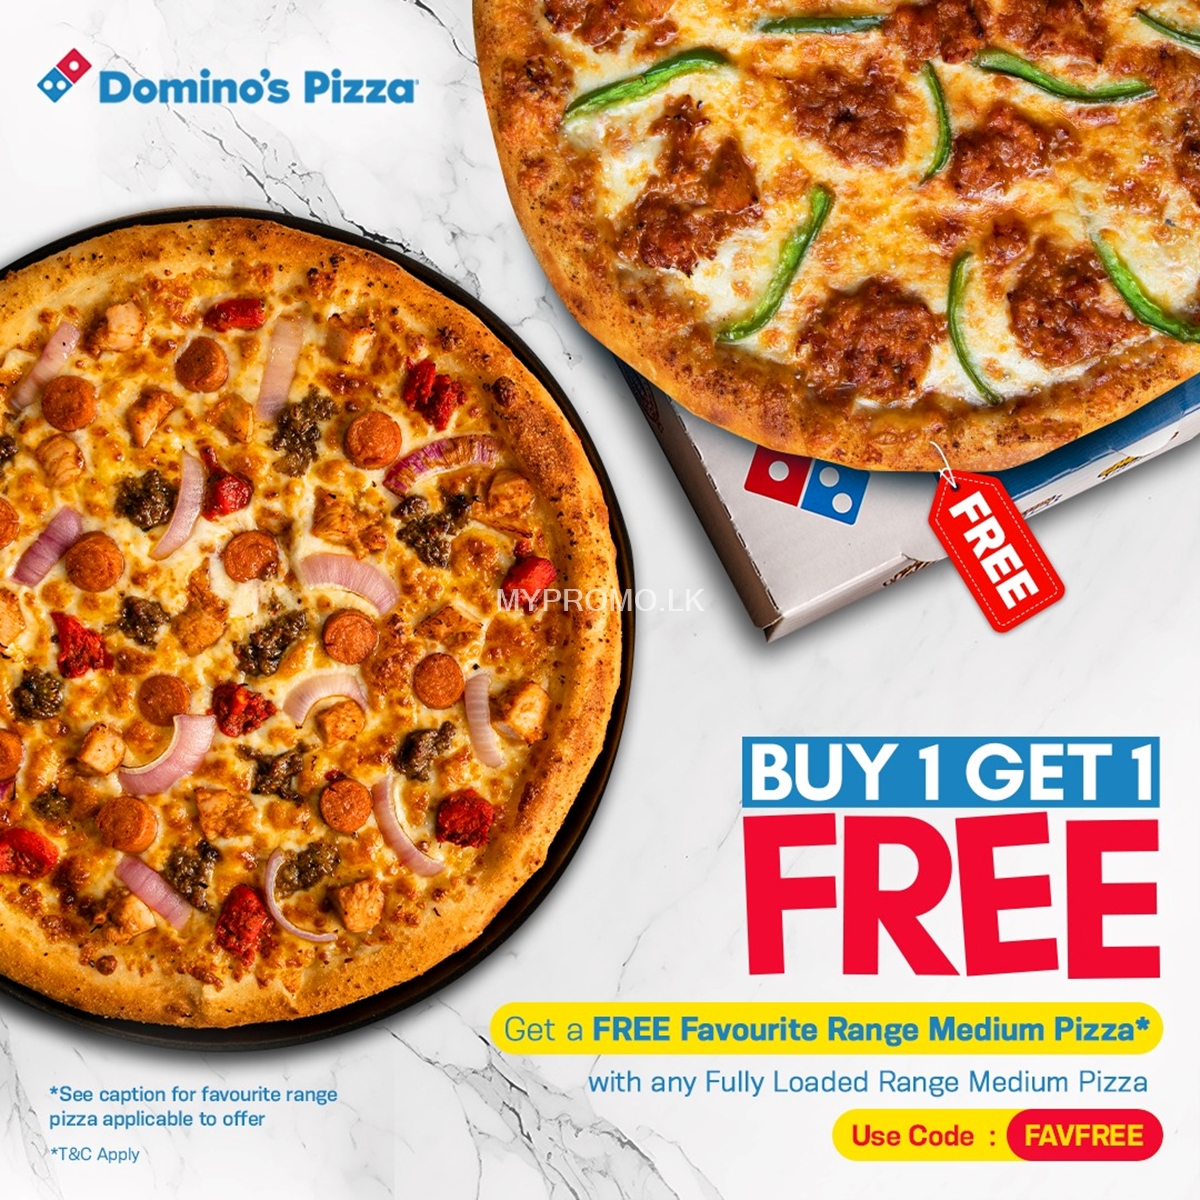 Buy 1 Get 1 Free at Domino's Pizza 